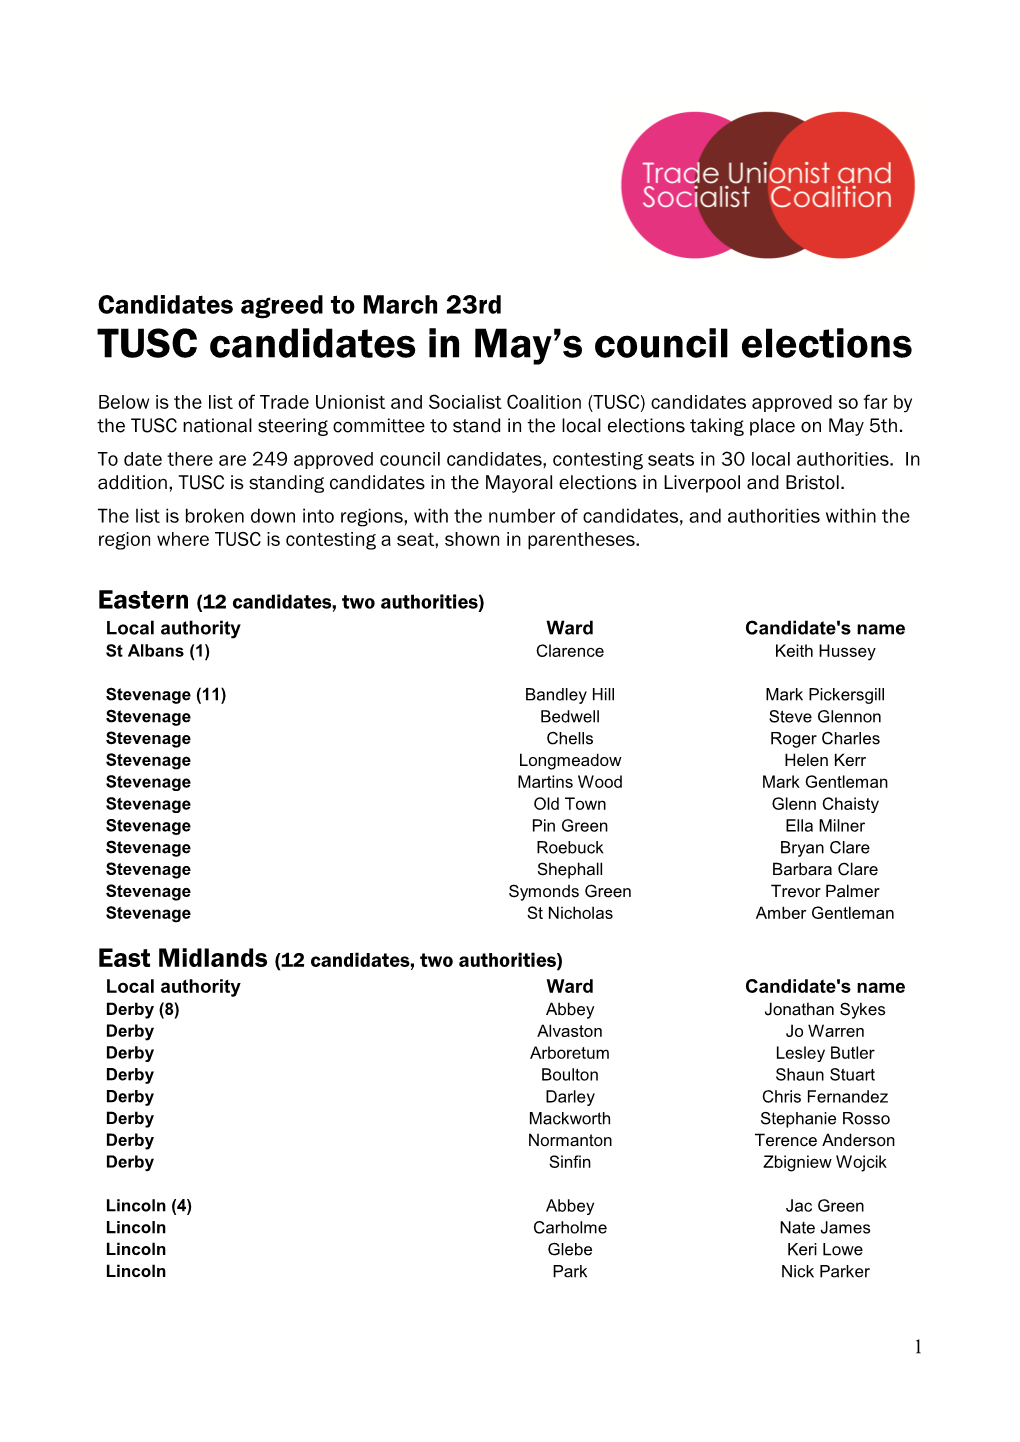 TUSC Candidates in May's Council Elections